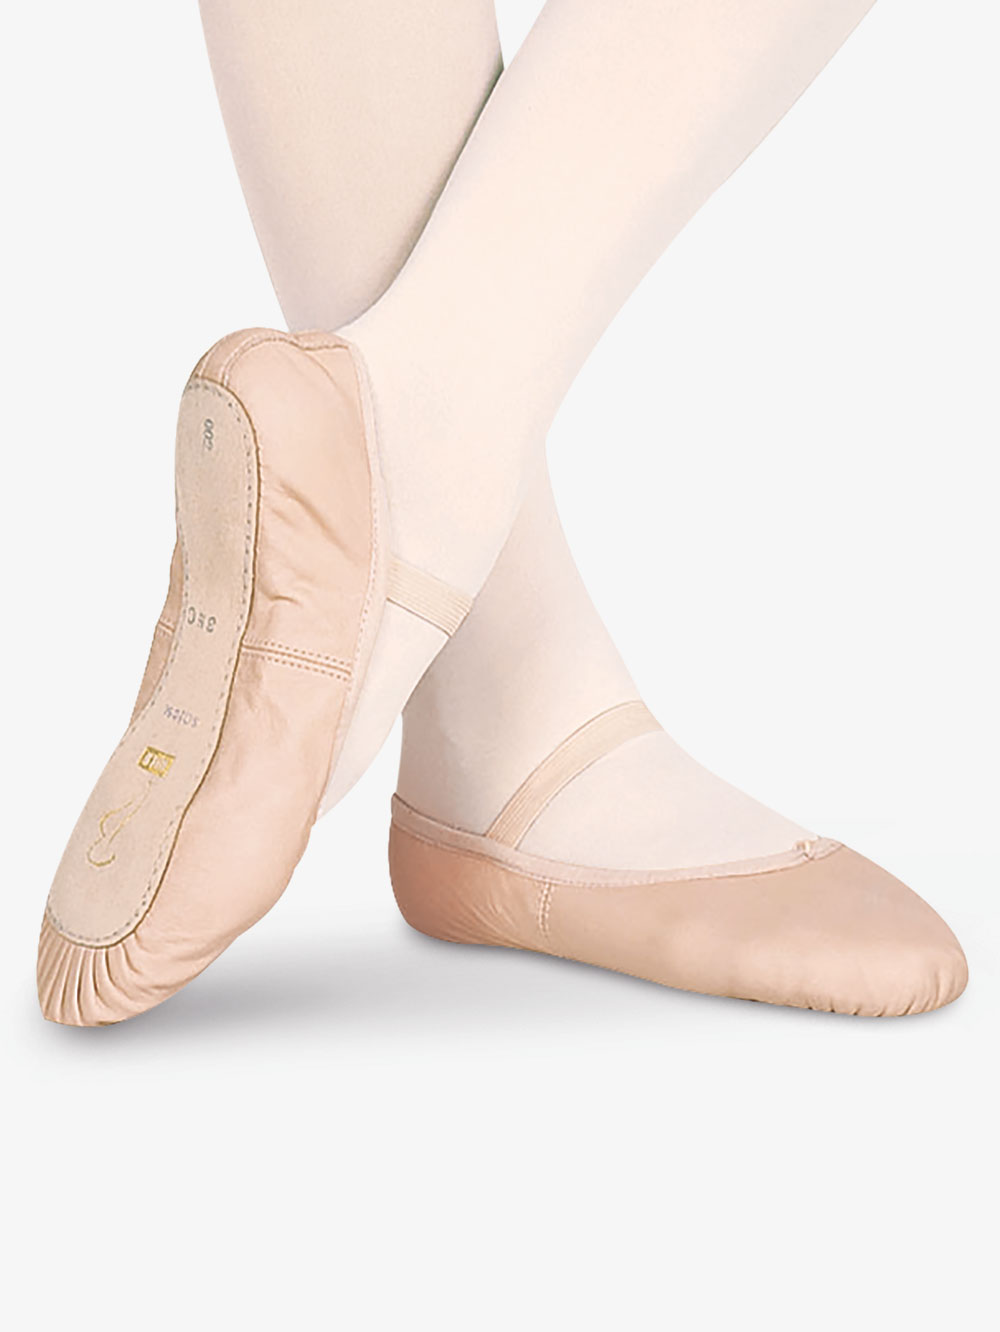 ballet shoes for boys